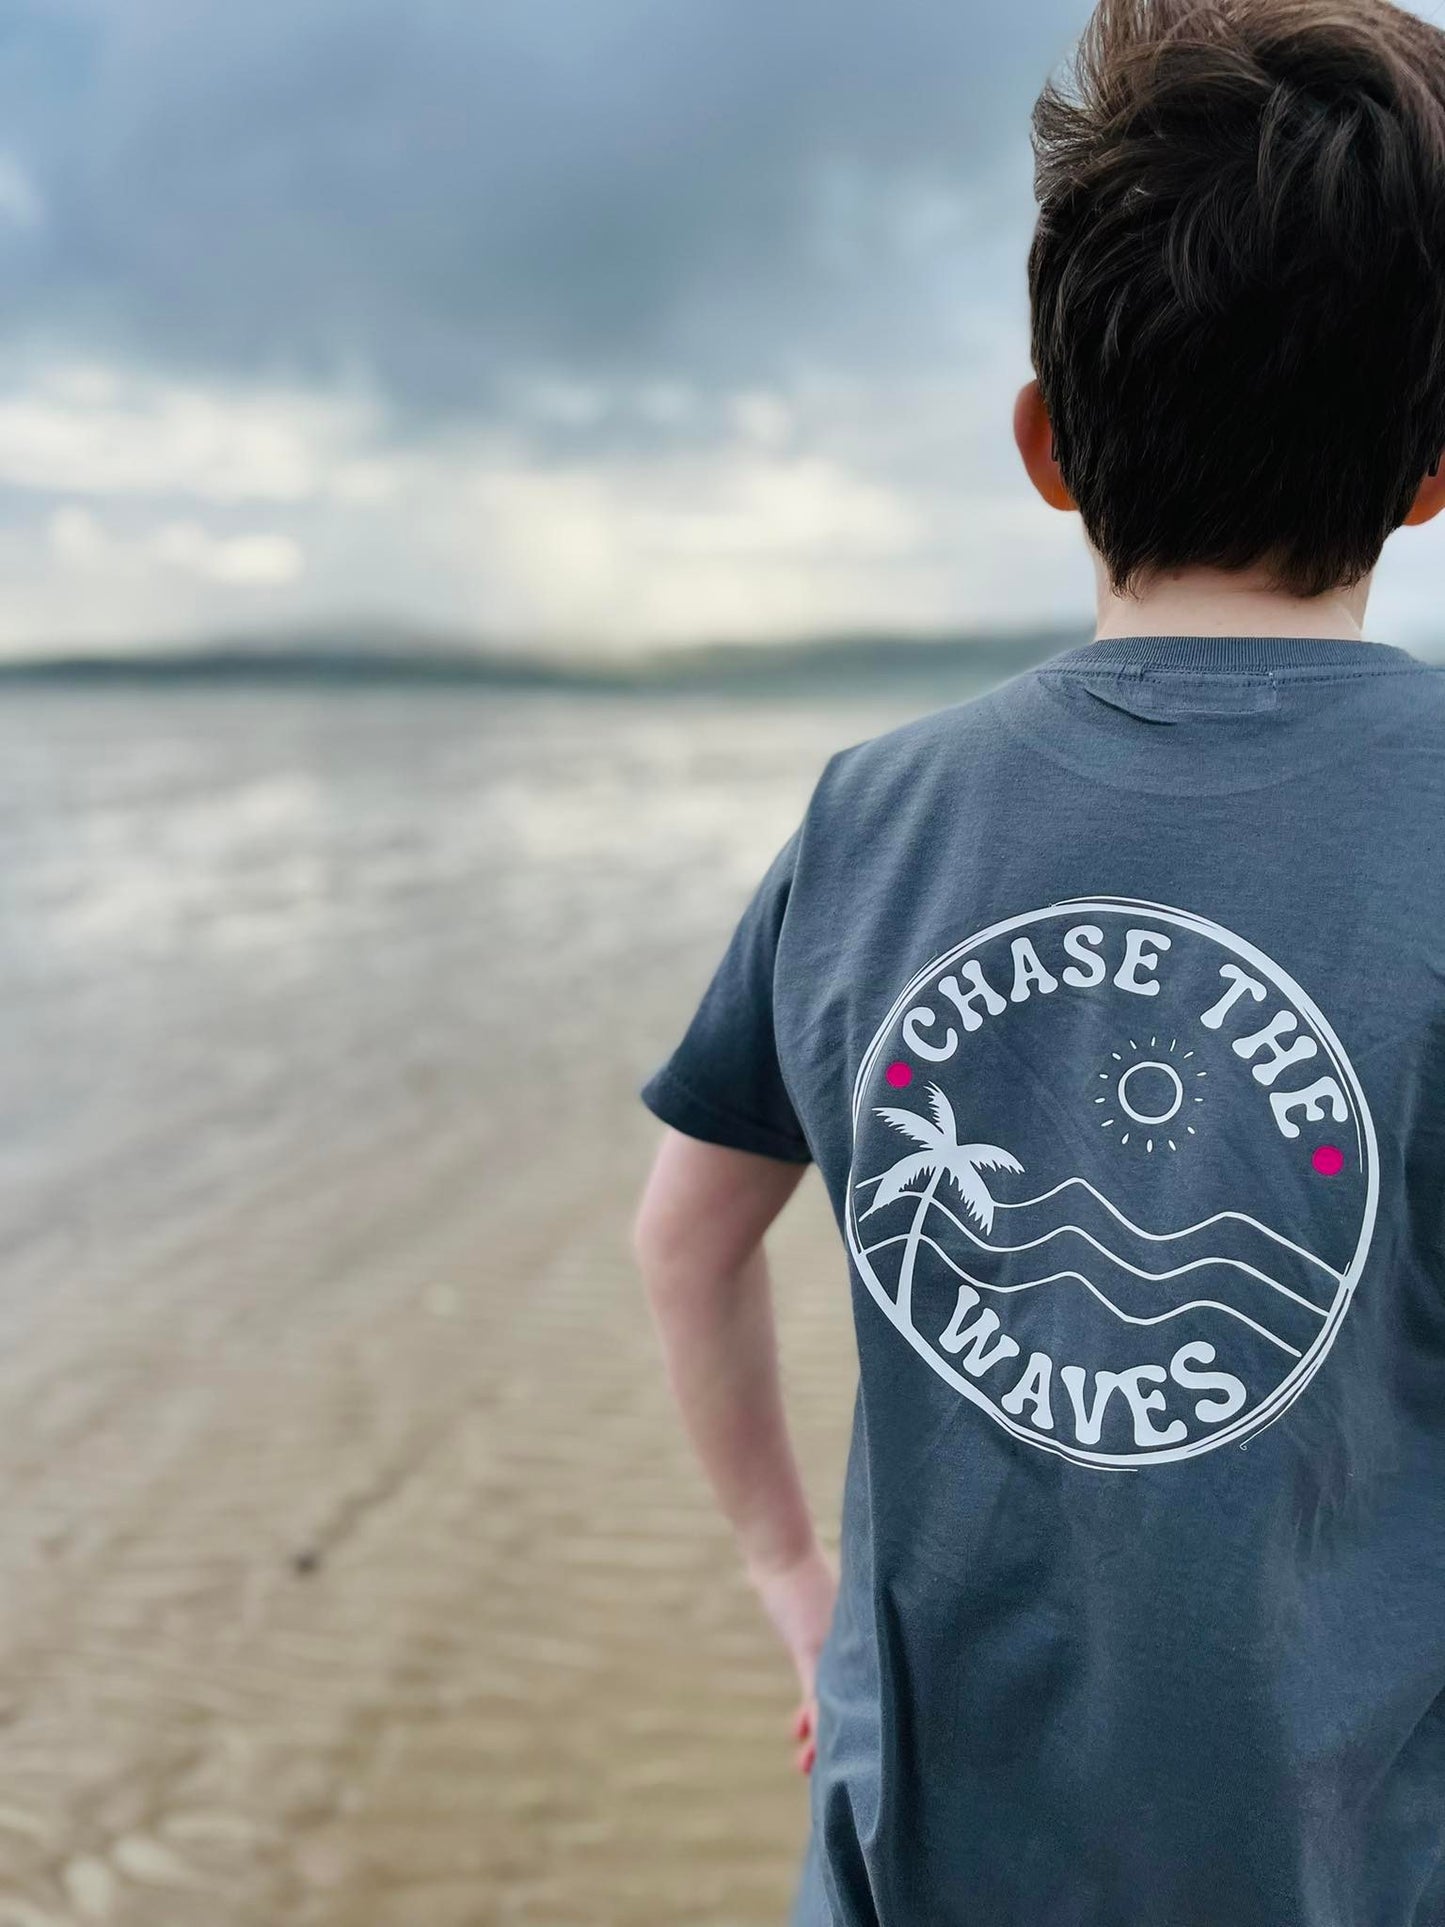 CHASE THE WAVES KIDS TEE